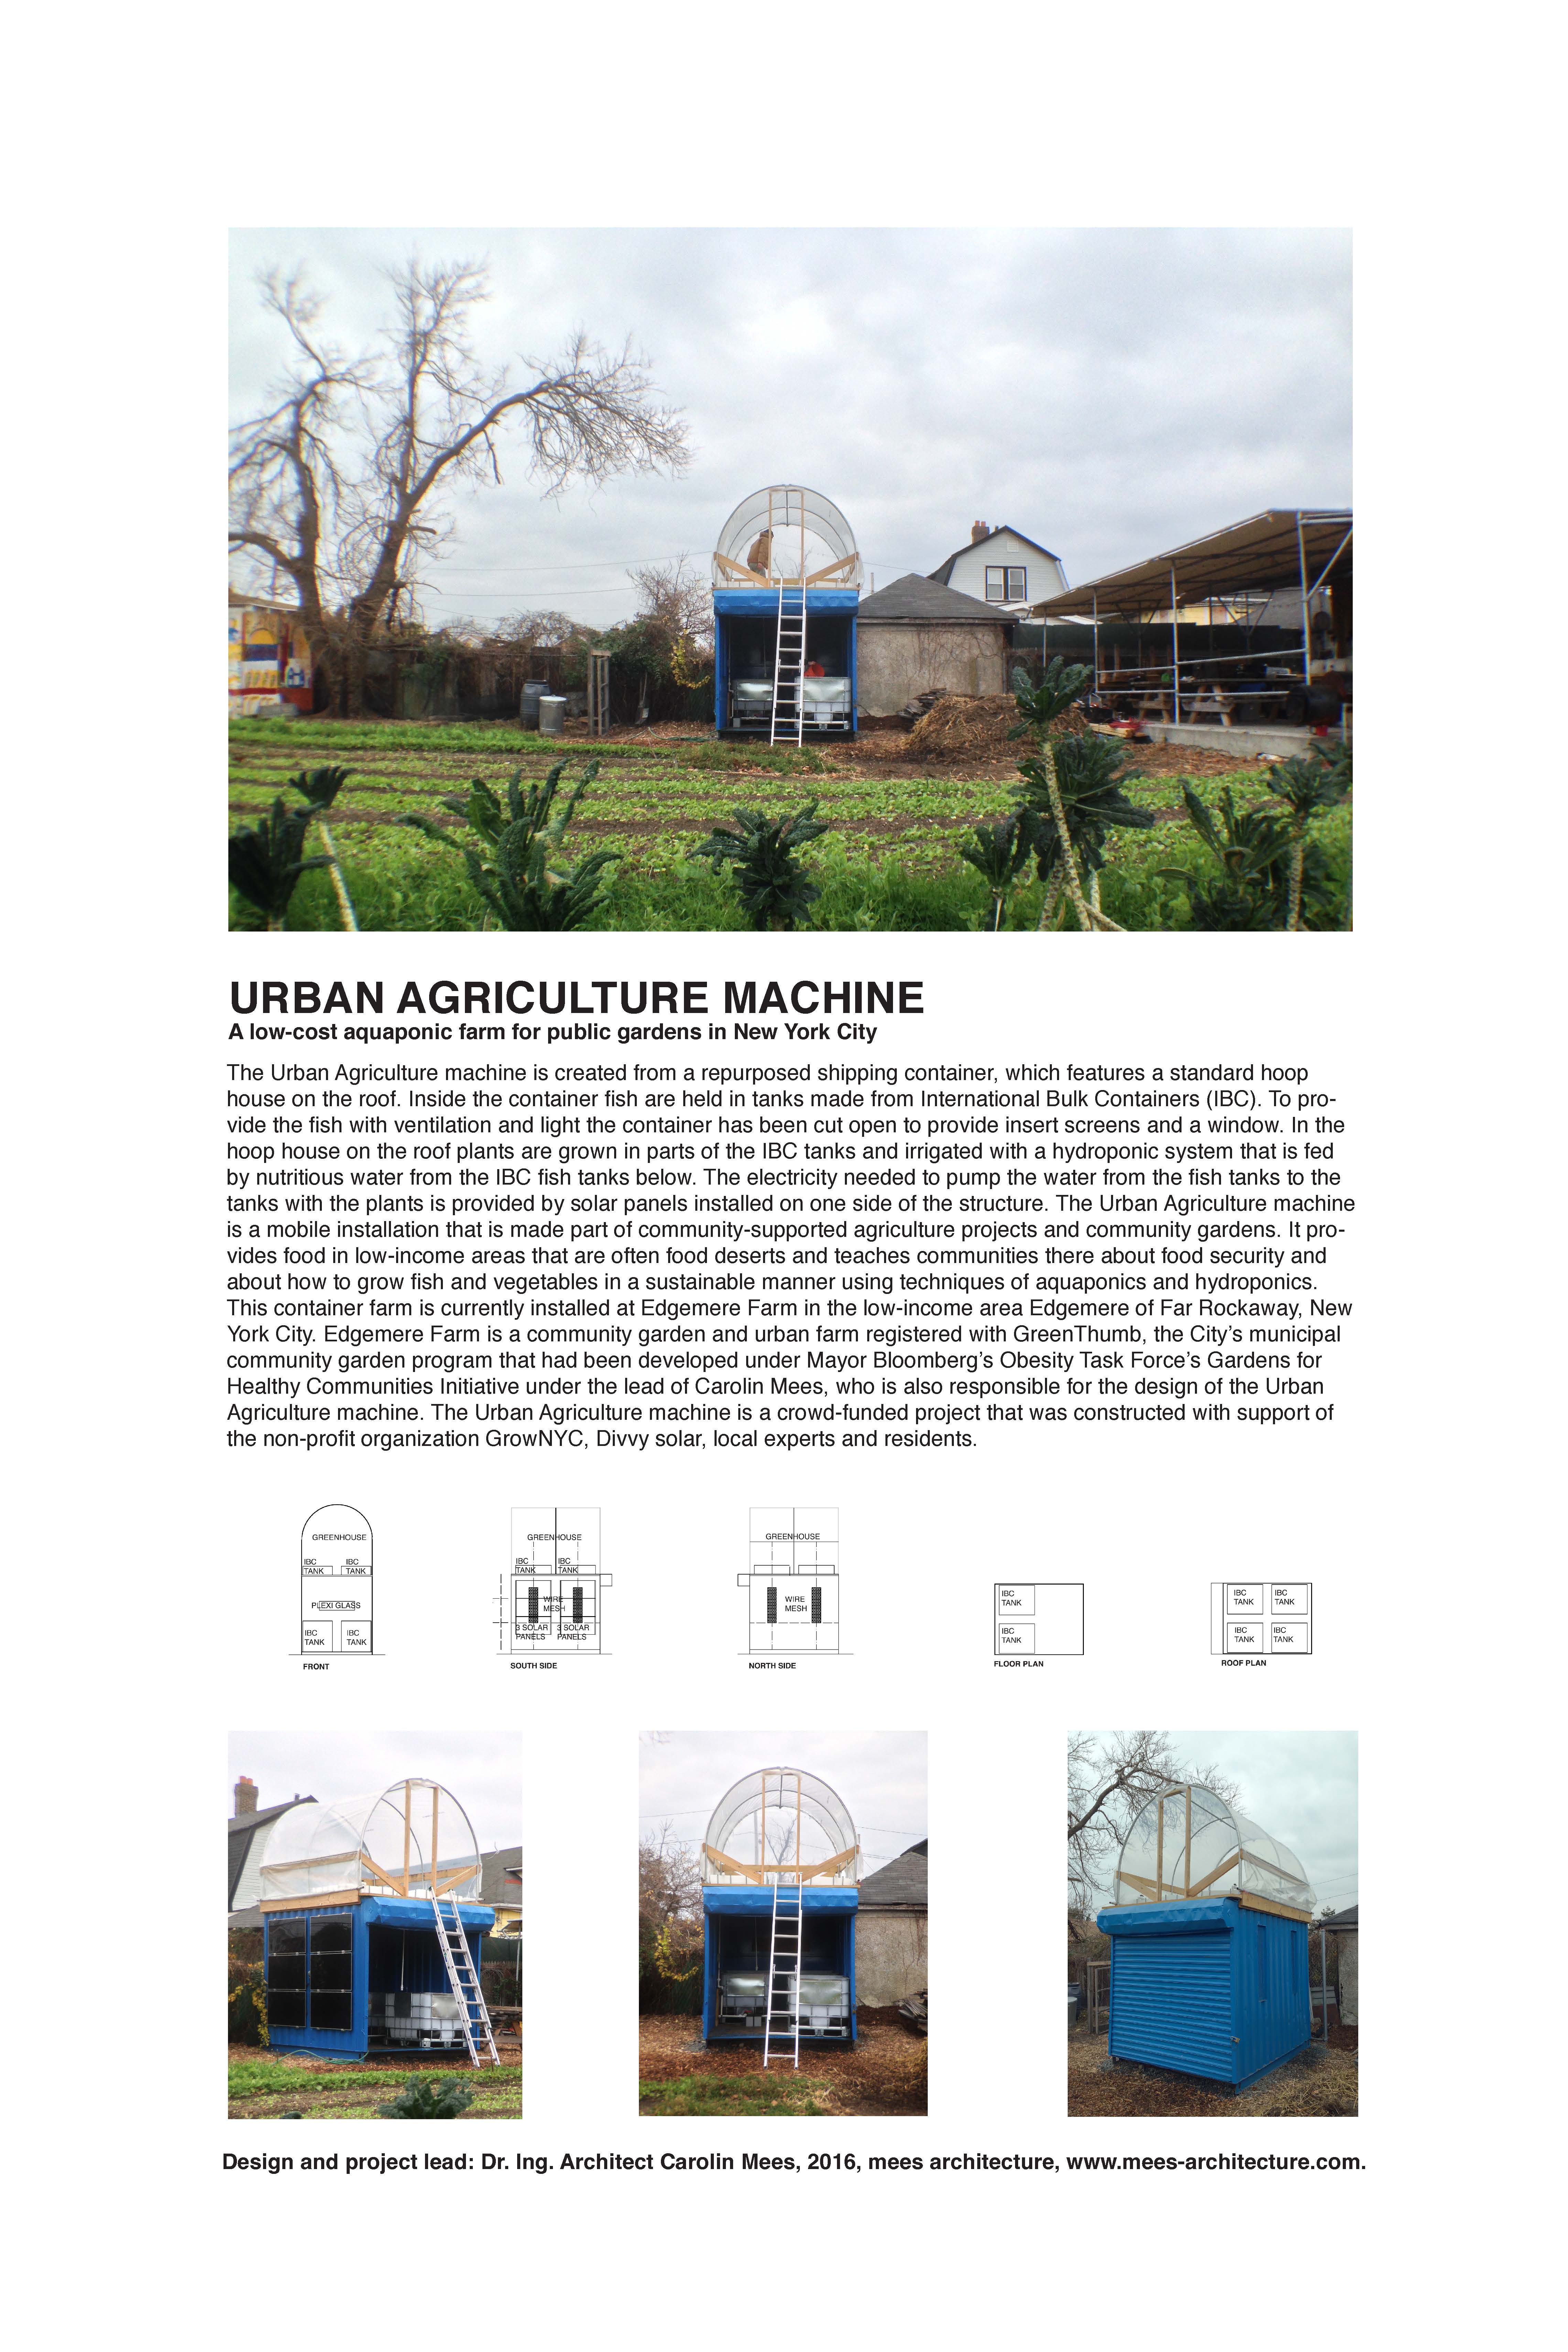 Fact sheet about Urban Agriculture Machine.